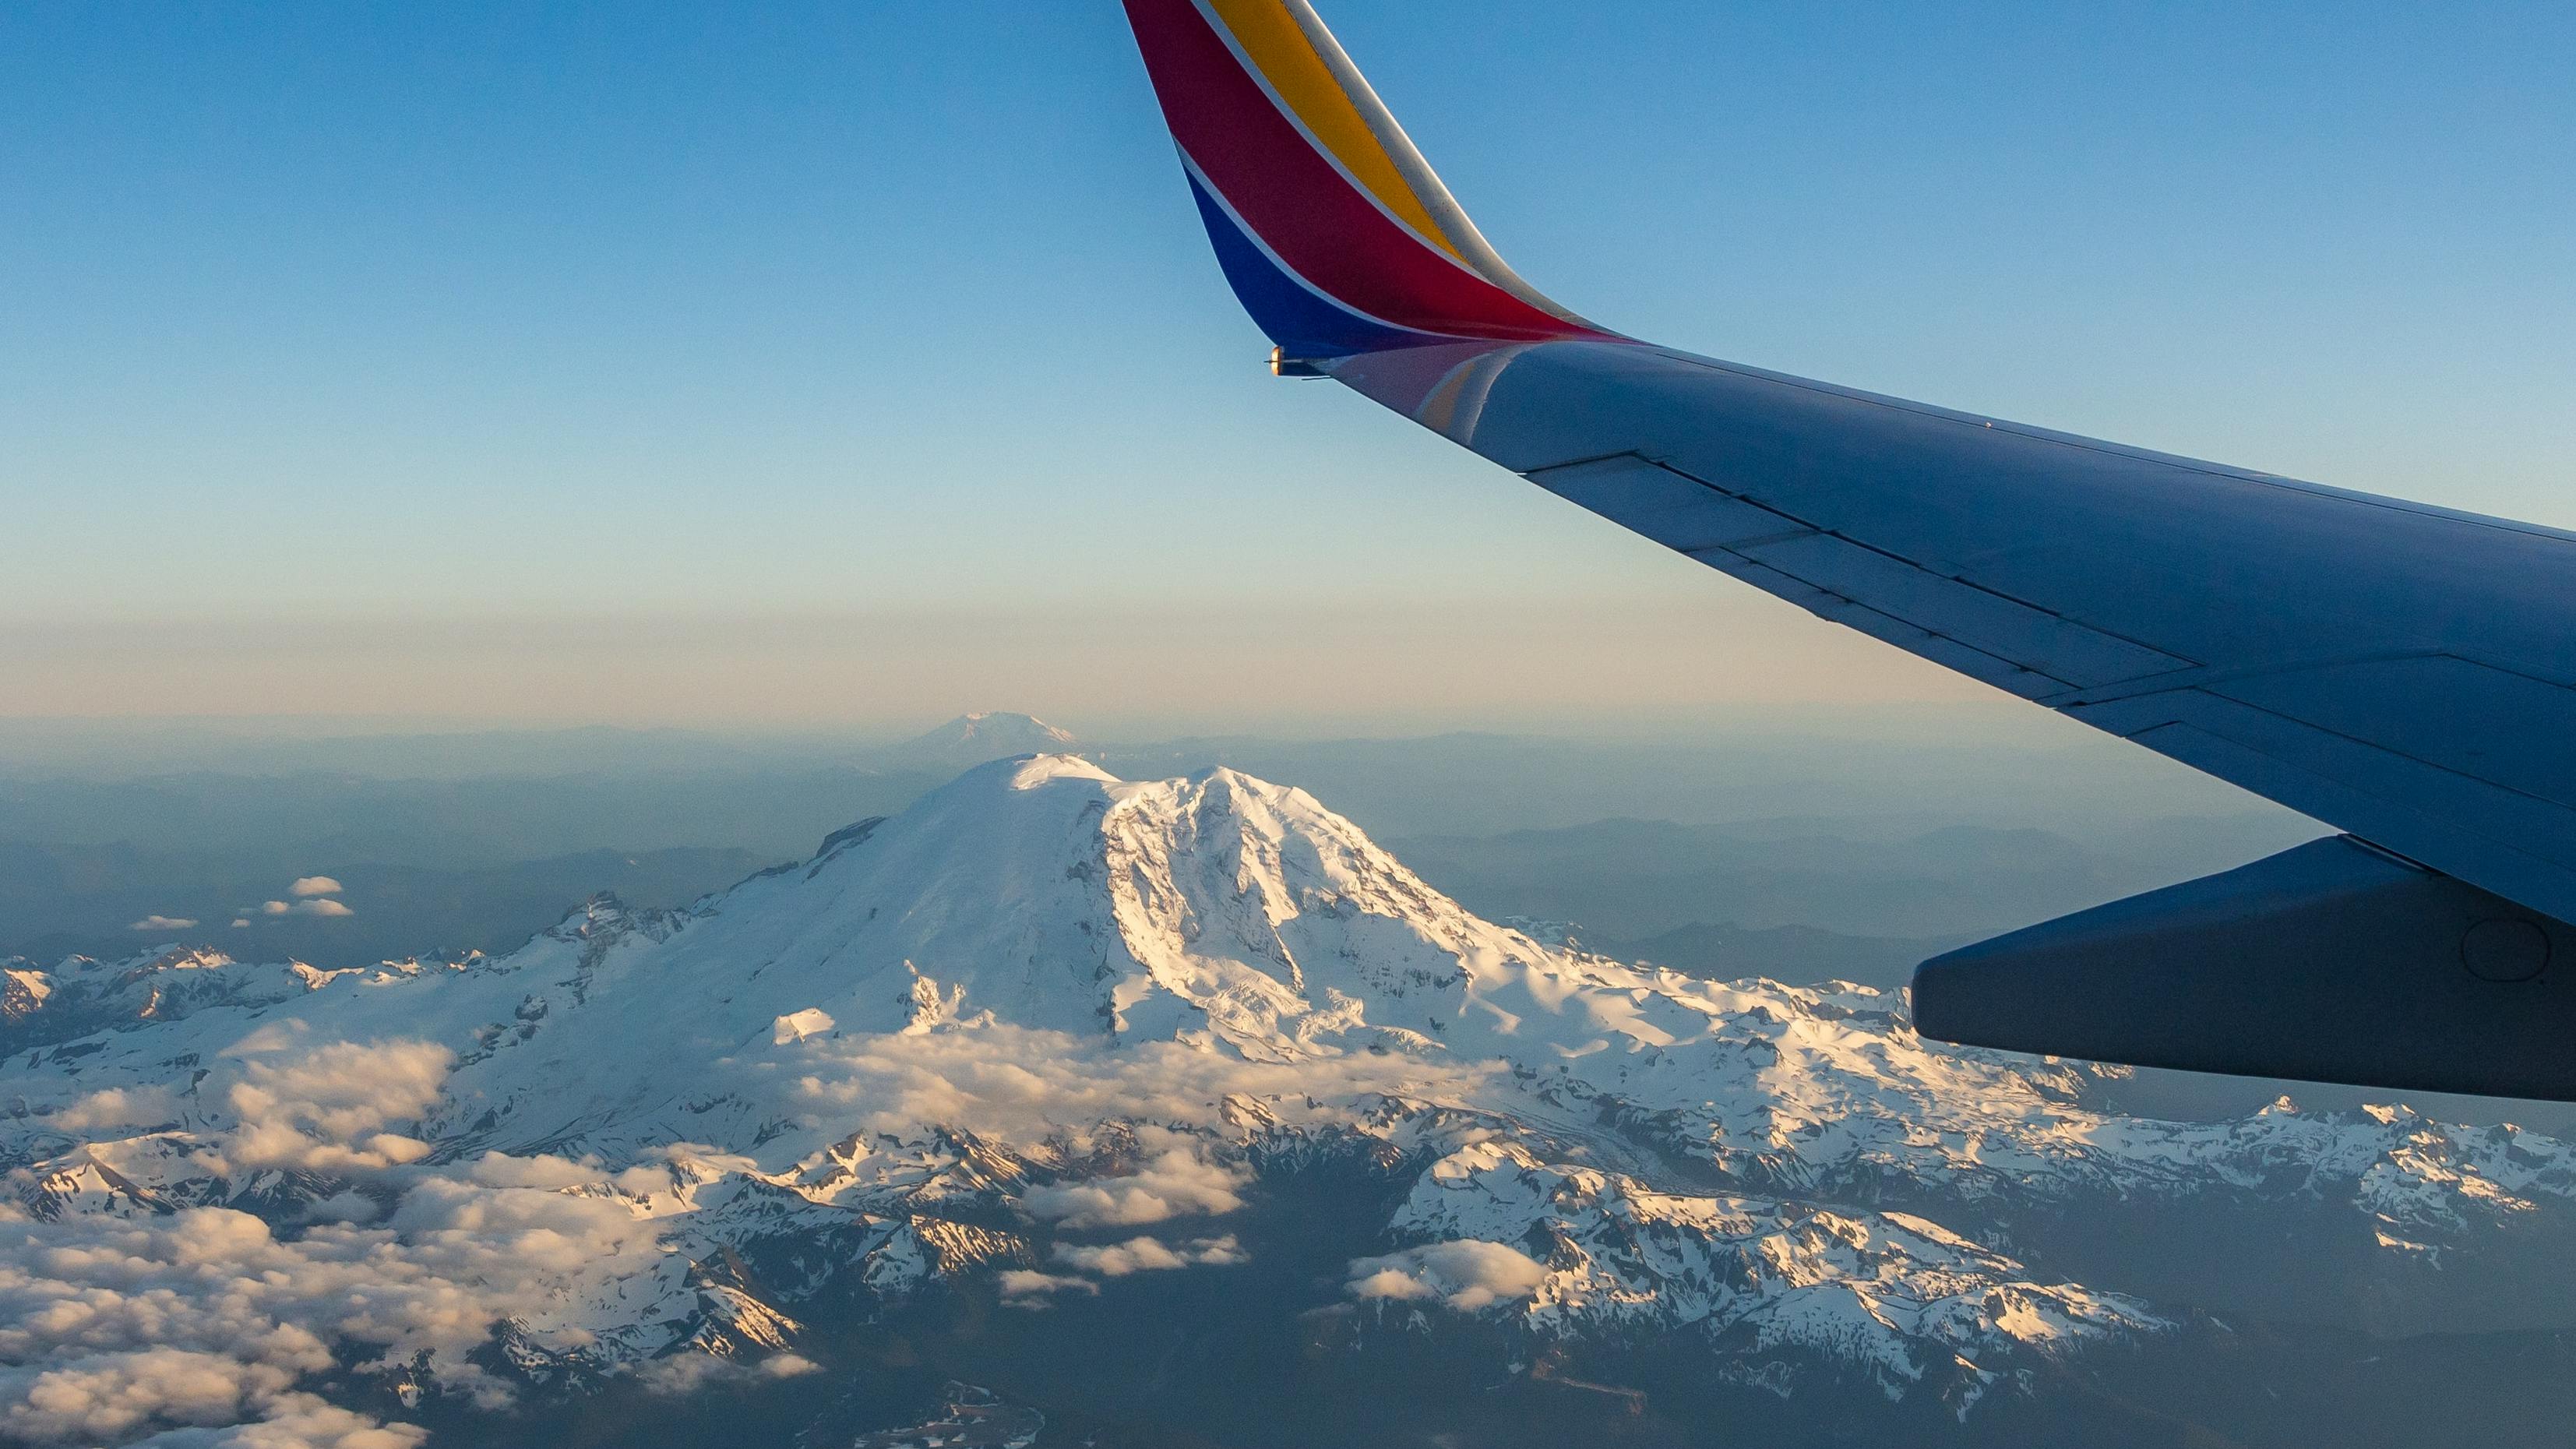 The snowy Mt. Ranier as seen from an airplane with the plane's wing in the view. 